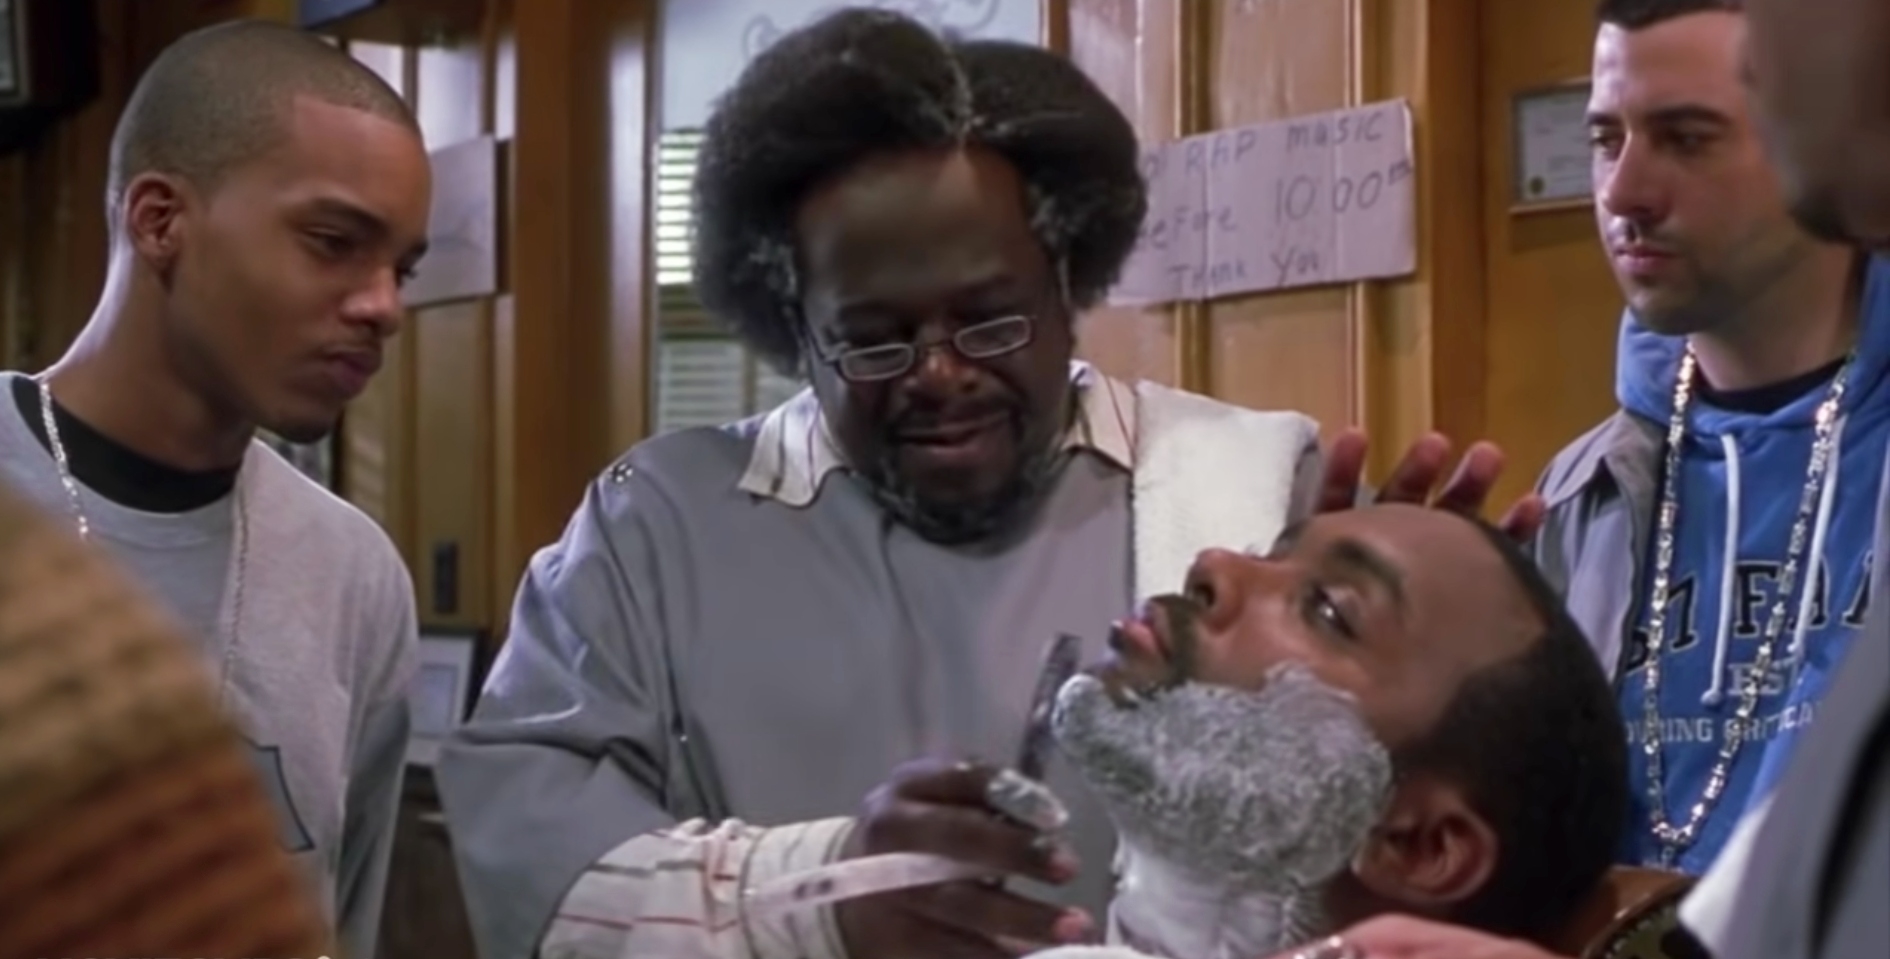 Characters from the movie &quot;Barbershop&quot; are watching as Cedric the Entertainer, who plays Eddie, is shaving a customer